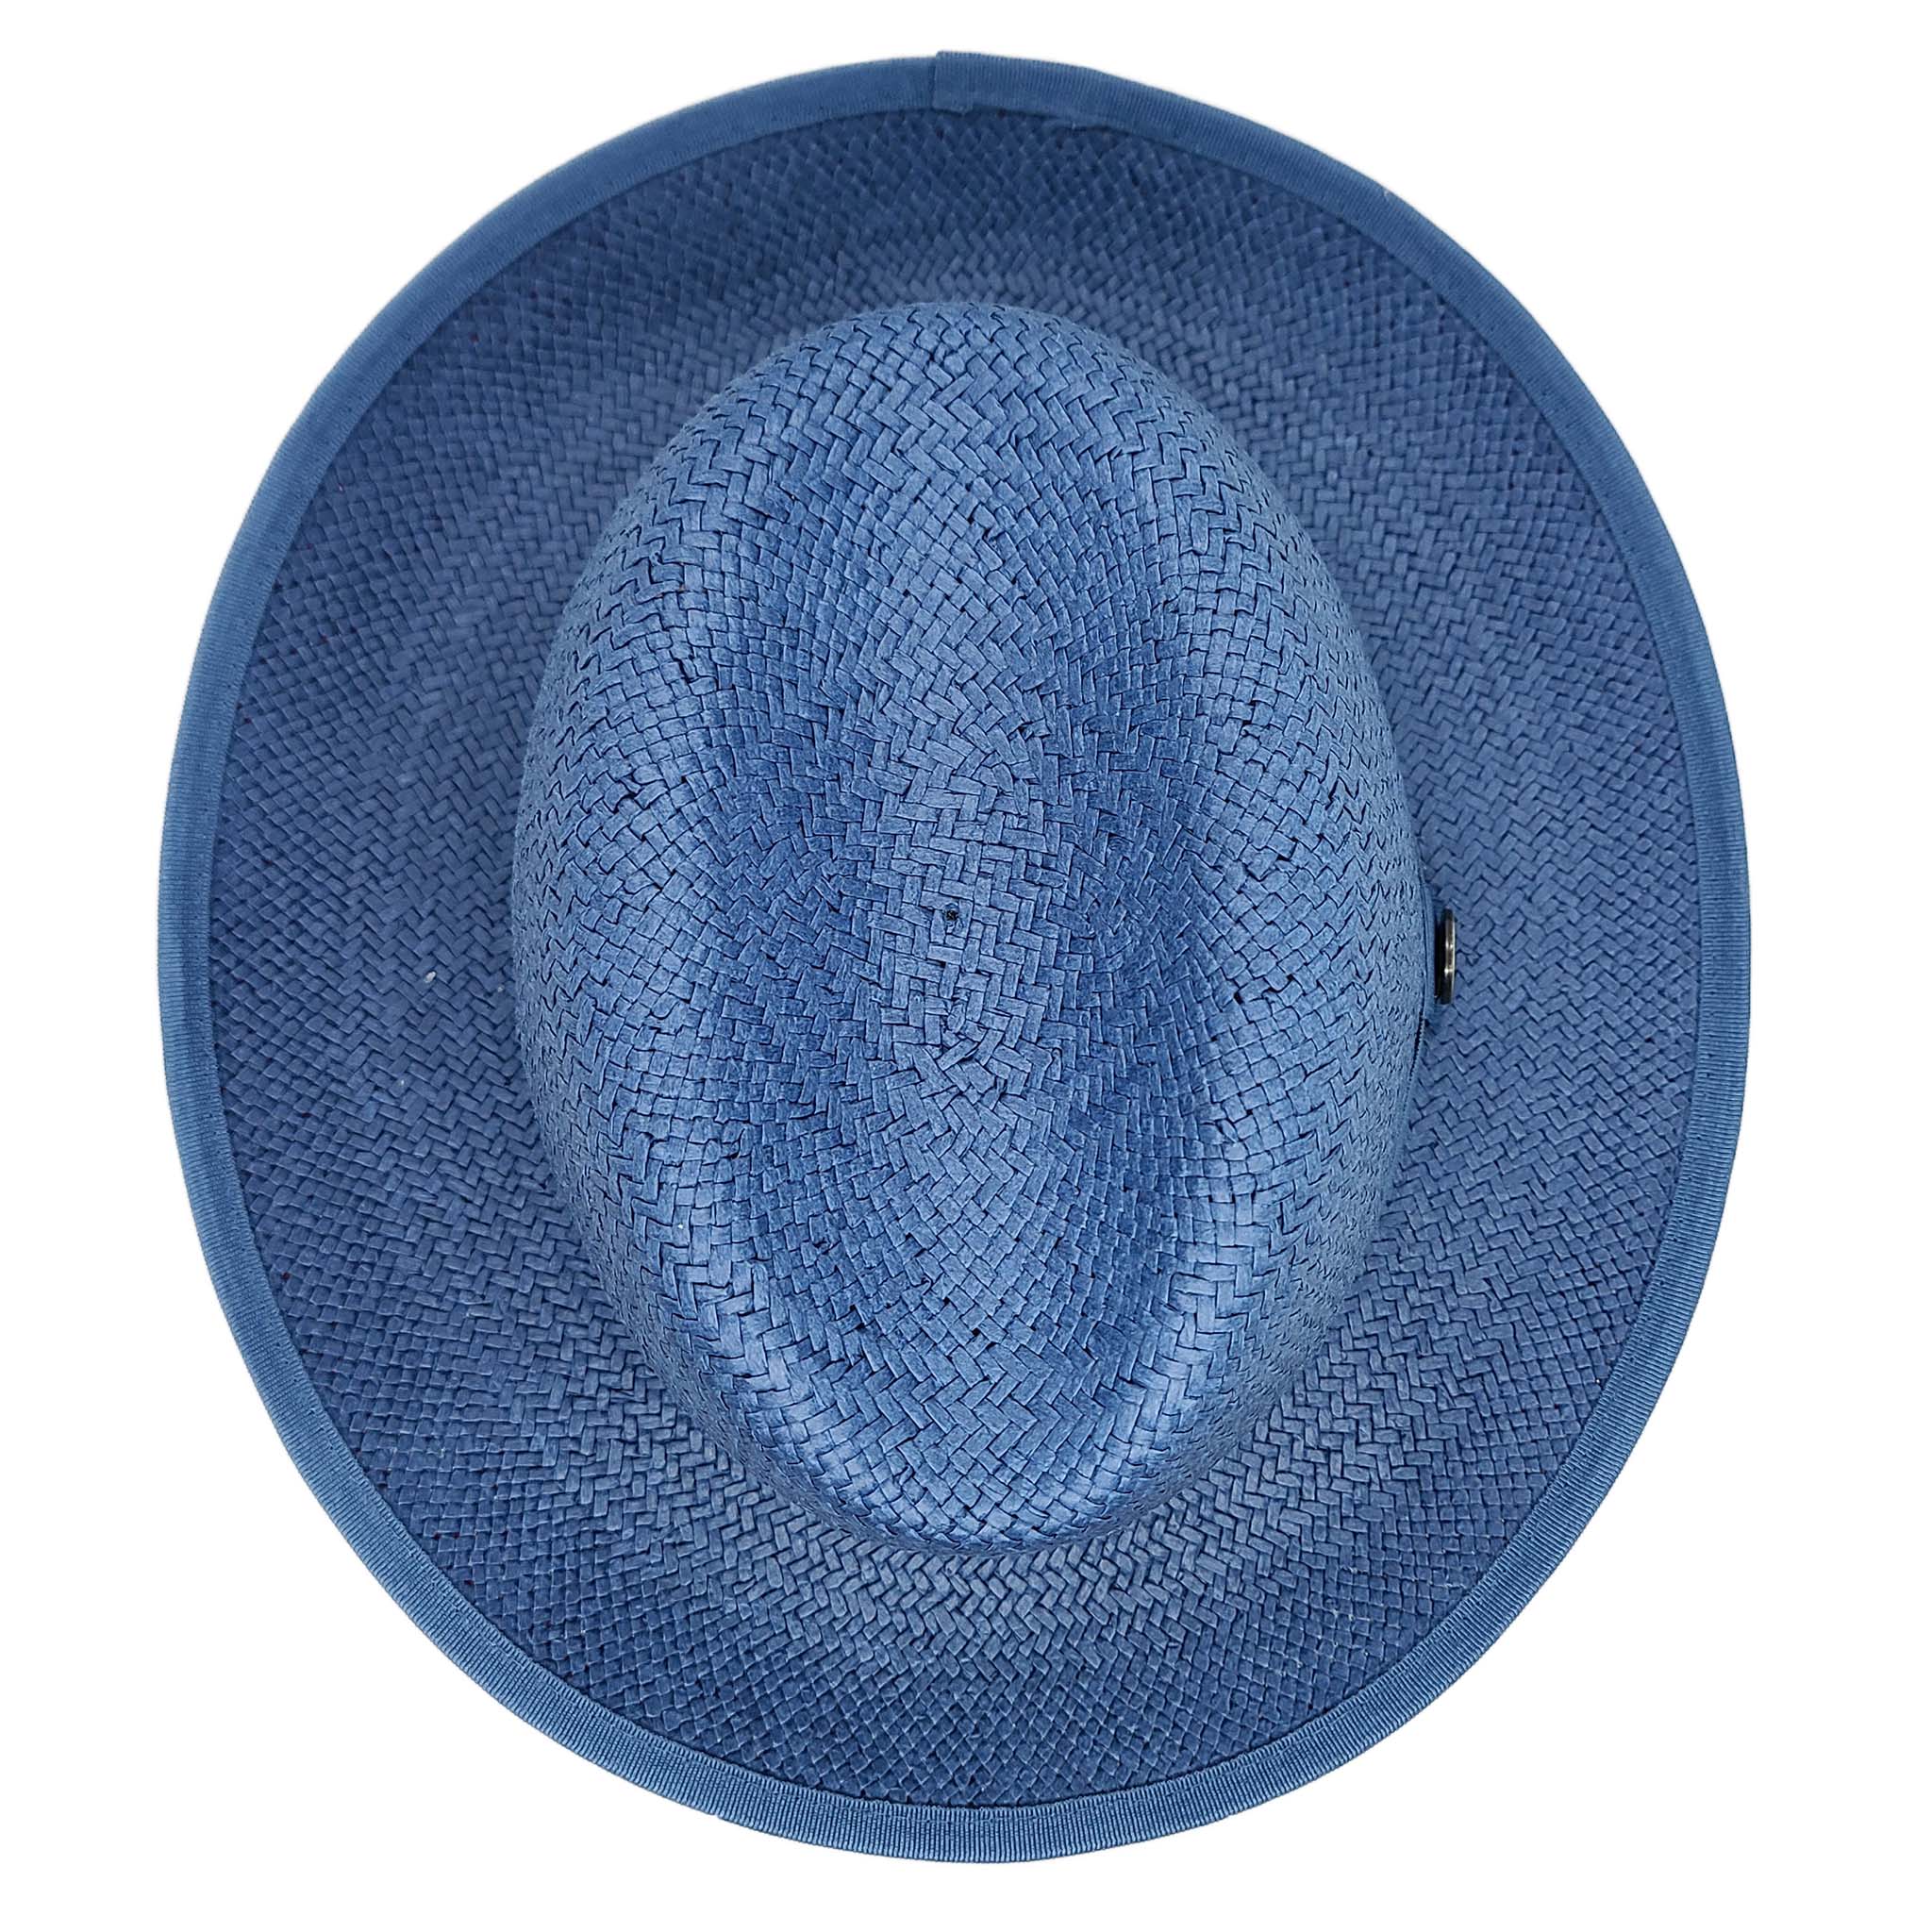 Men's and Women's Sun Hat - High-quality, lightweight, and comfortable hat with a modern twist, ideal for any occasion.